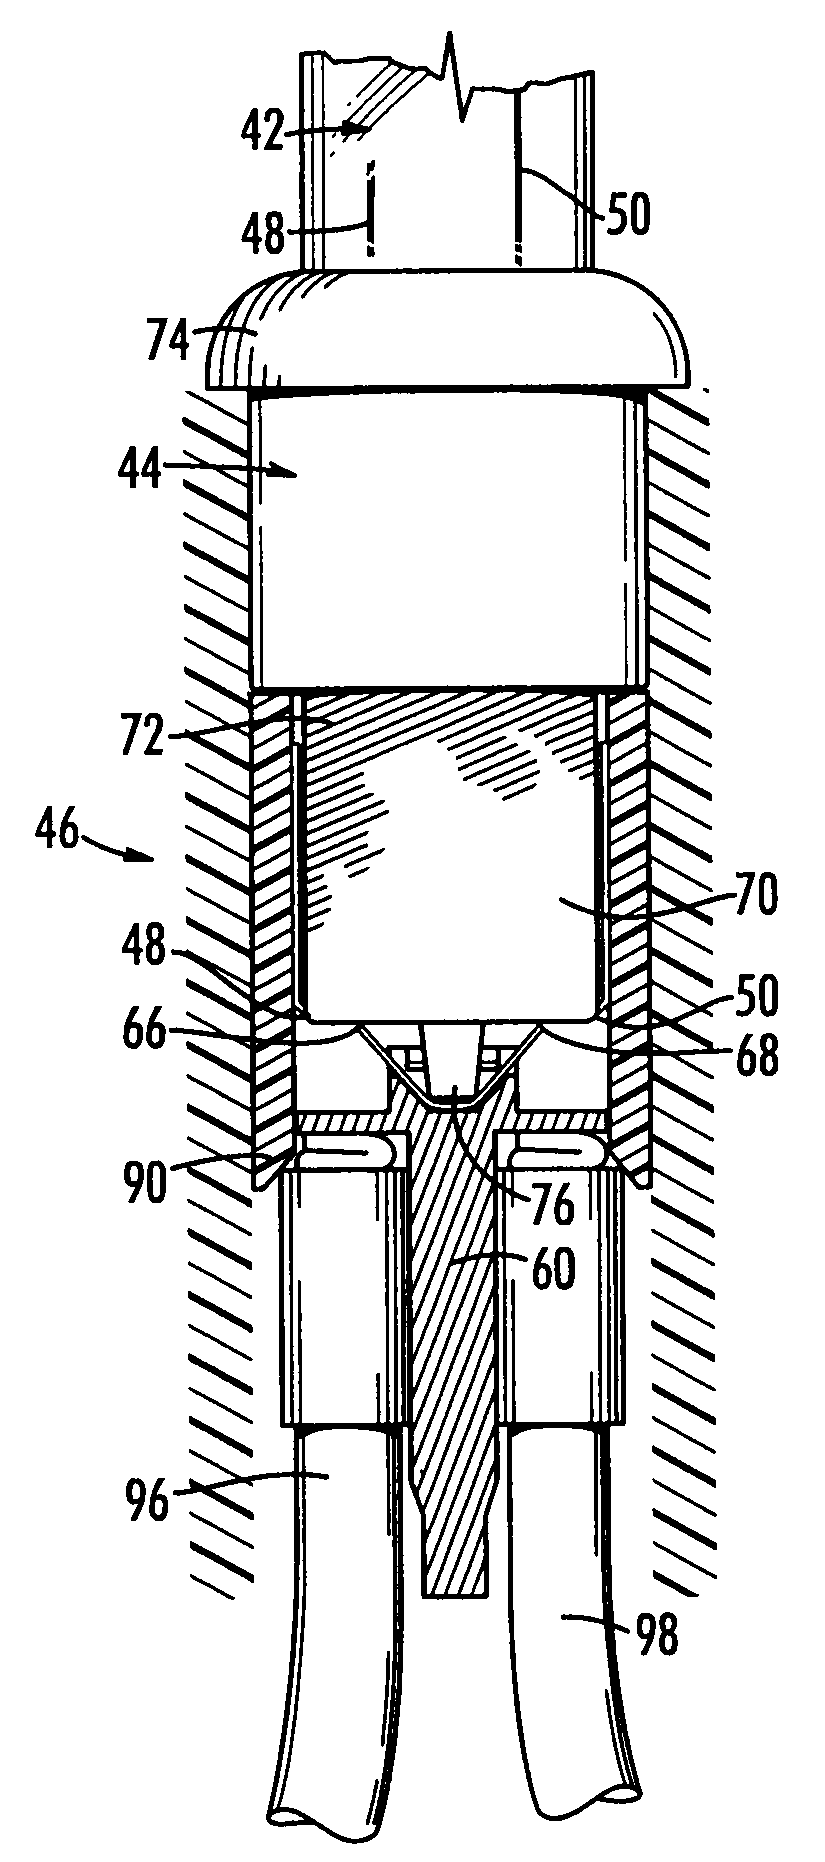 Mechanical shunt for use in a socket in a string of lights